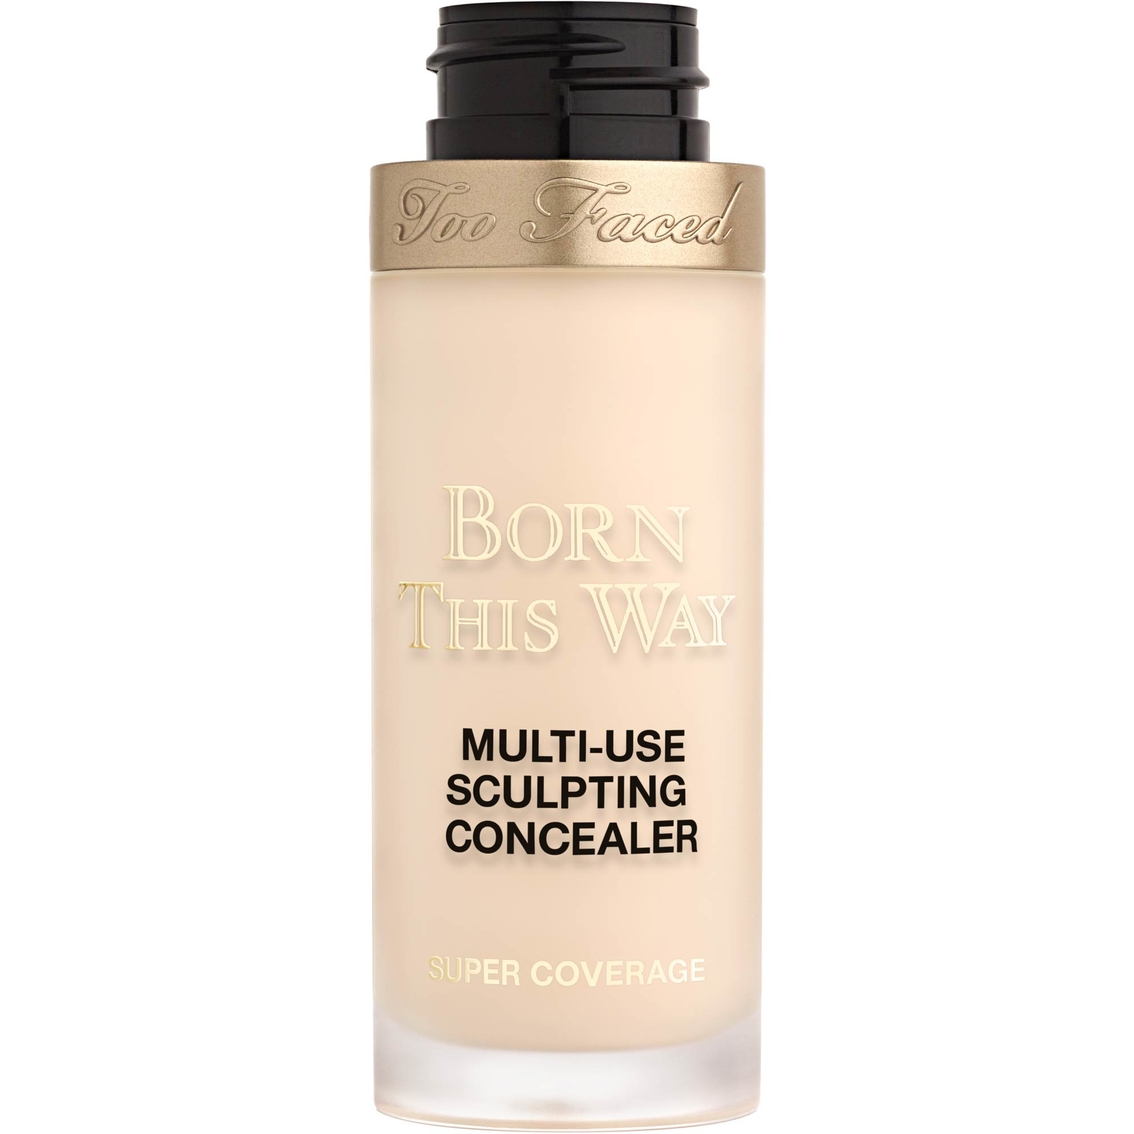 Too Faced Born This Way Super Coverage Multi Use Sculpting Concealer - Image 3 of 4